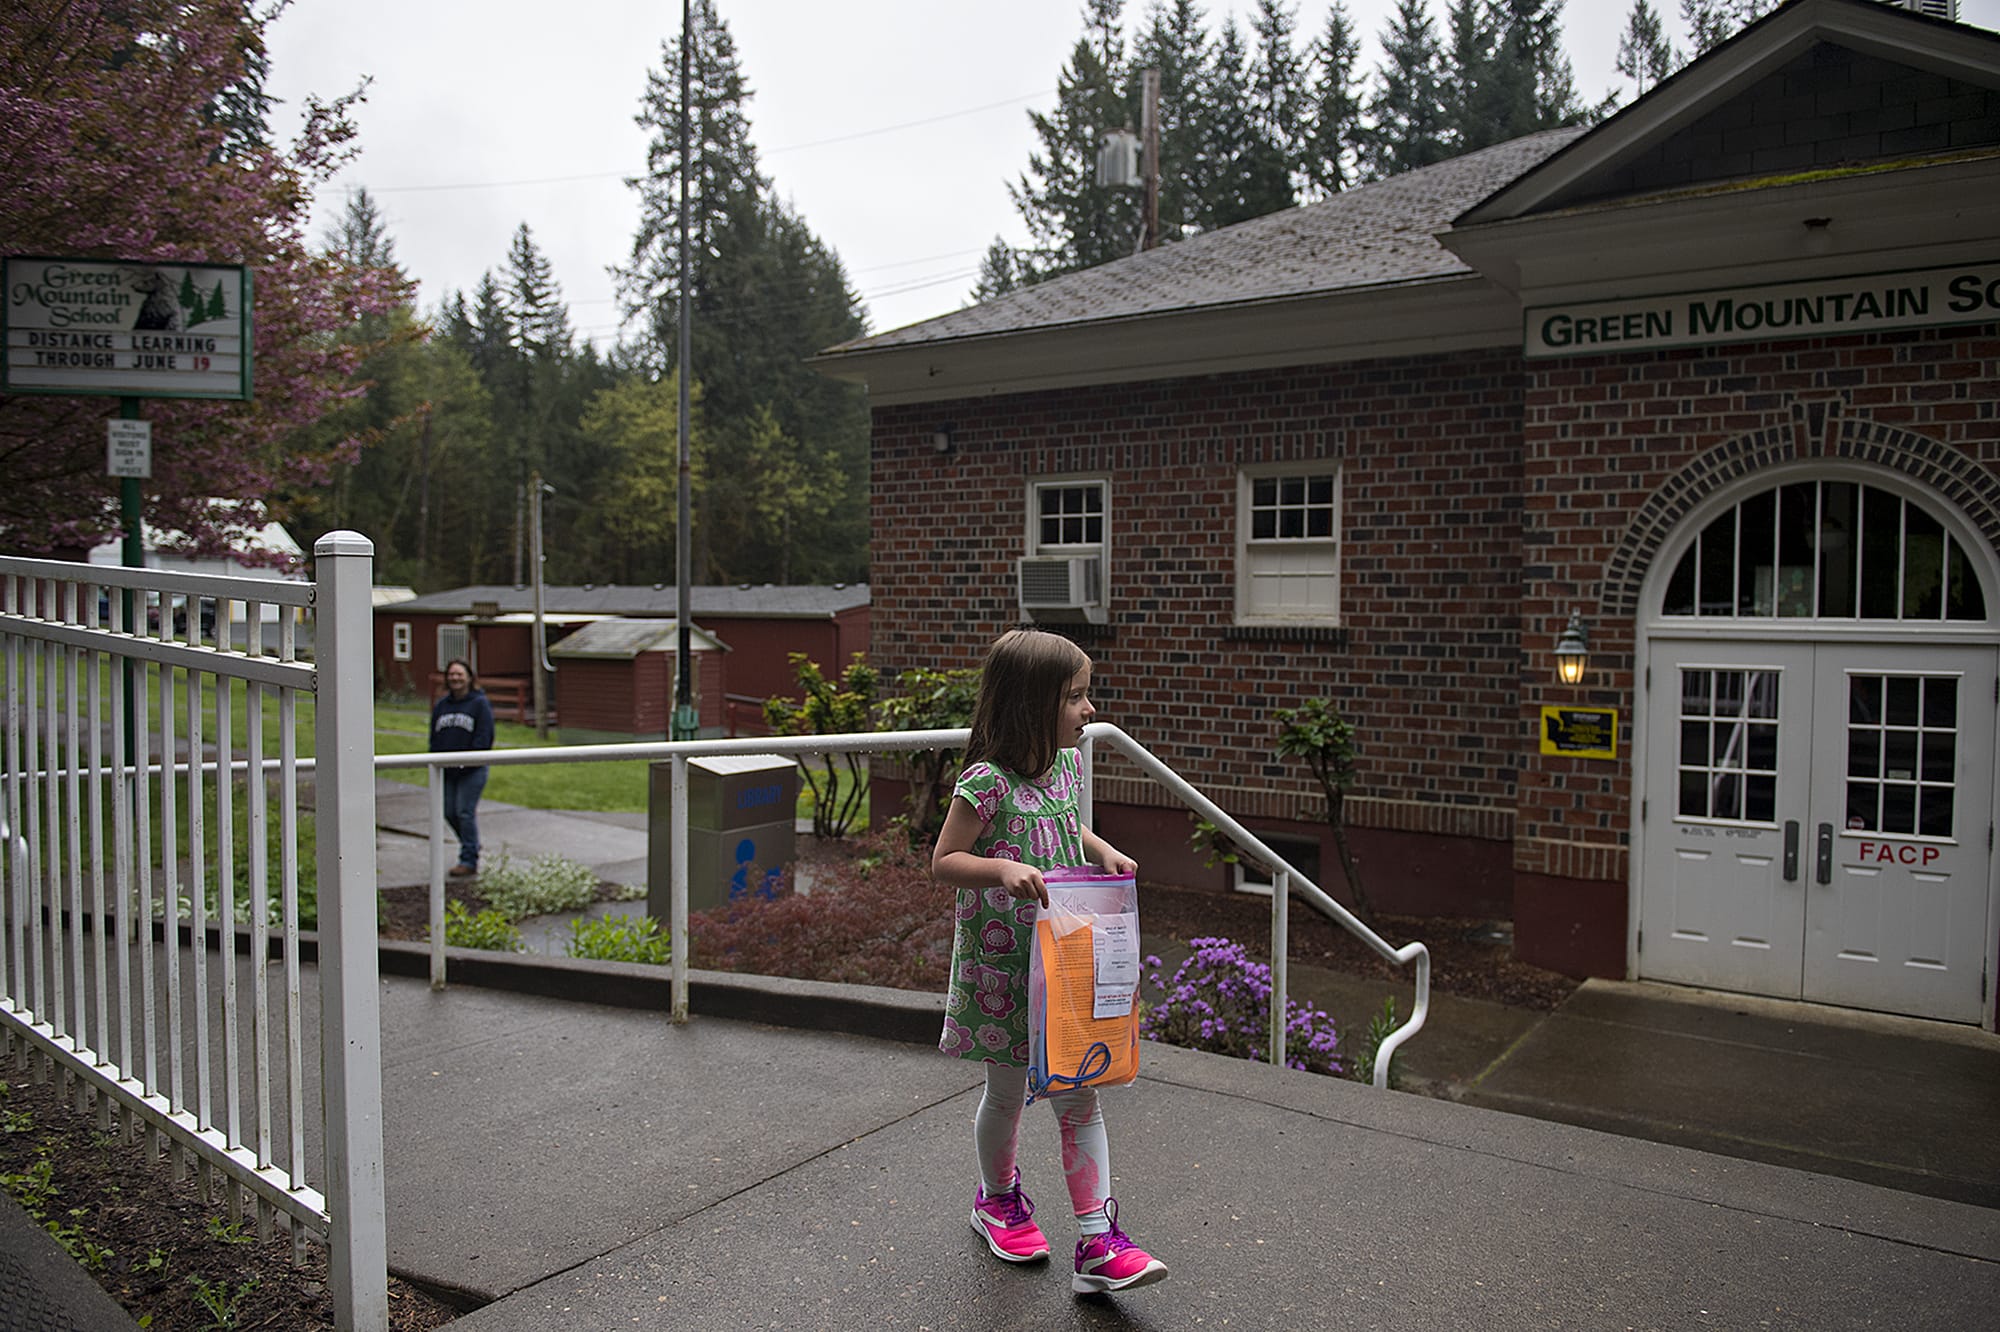 Green Mountain School first-grader Kolbie Bennett, 7, takes the school packet with her assignments to go while visiting the closed campus with her mom, Aeranee, in Woodland on Friday morning, April 24, 2020.